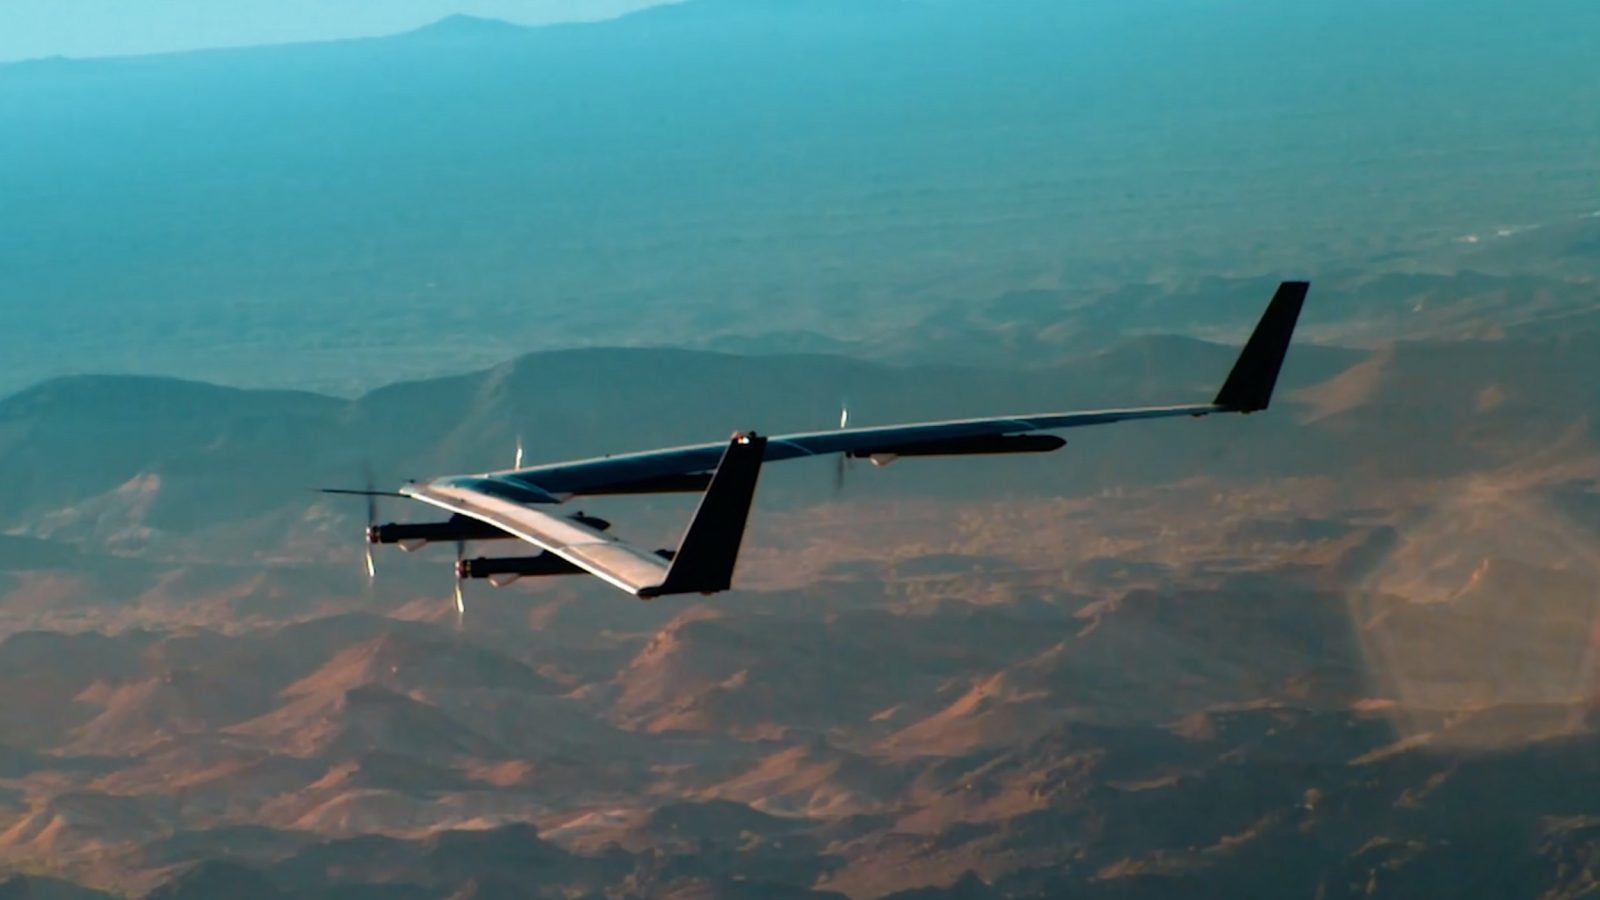 Facebook scraps Aquila drone project after 4 years